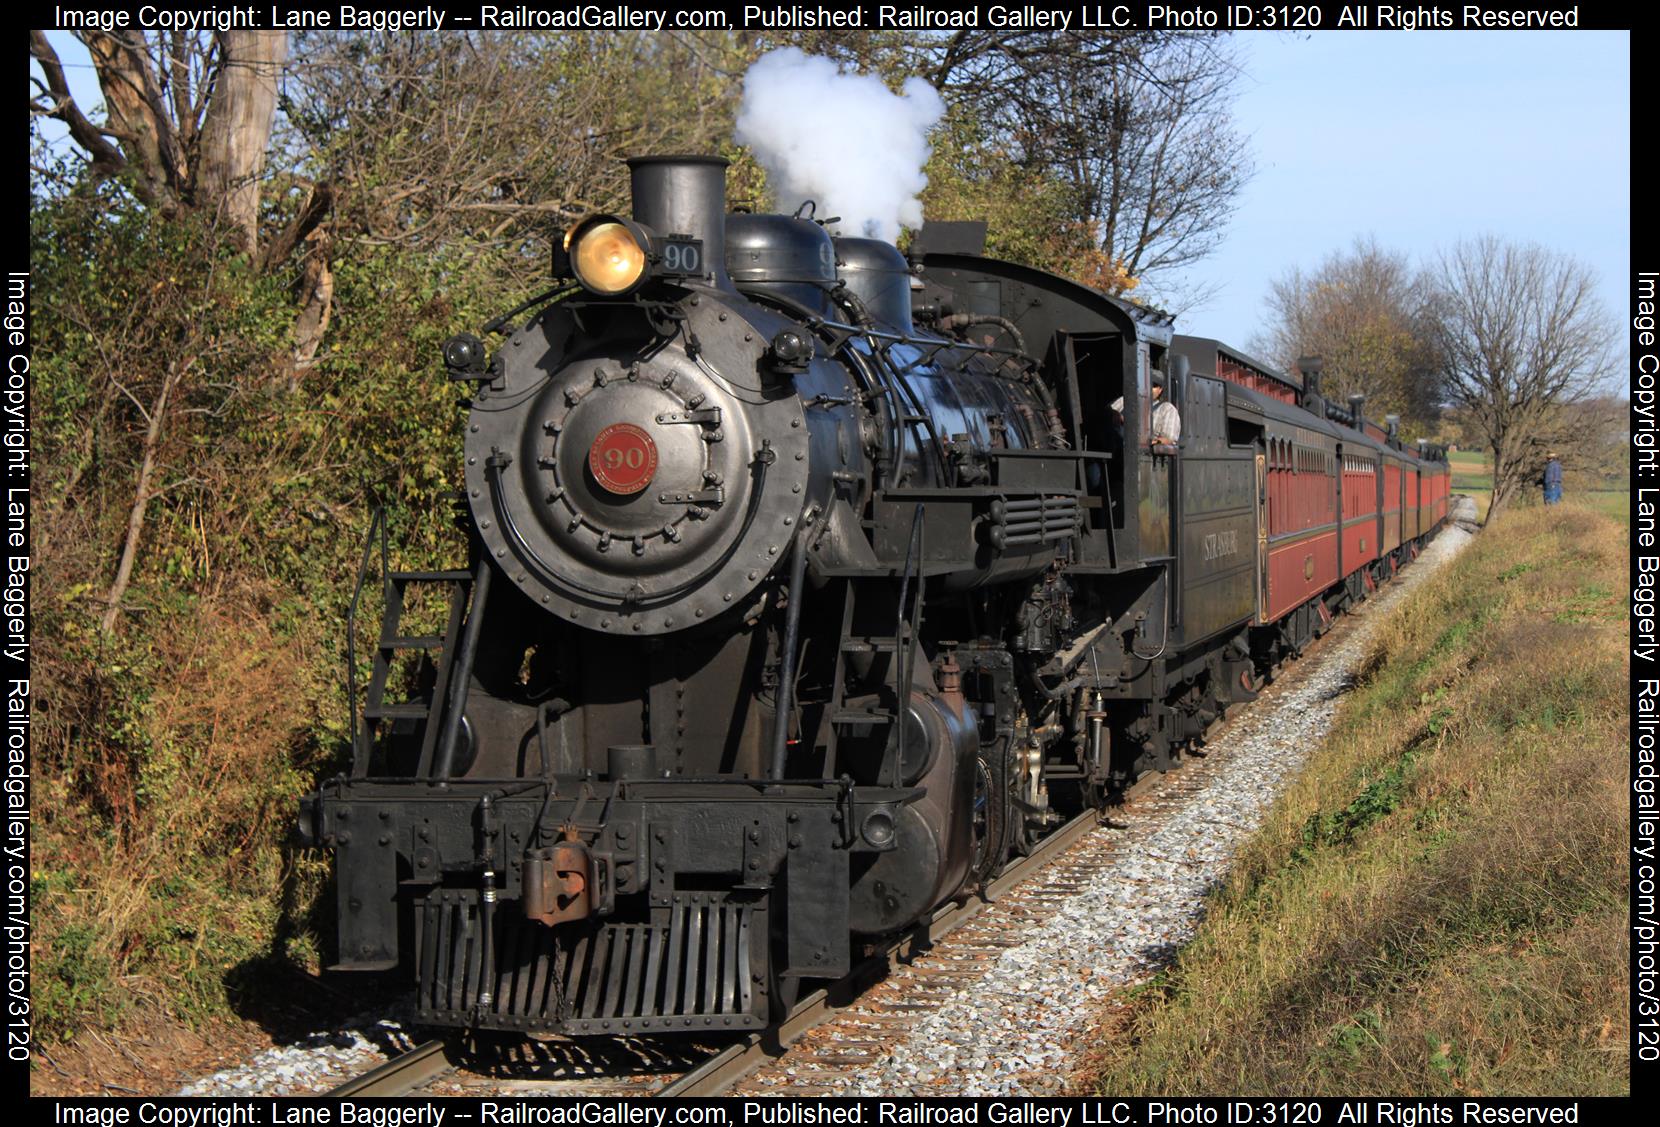 SRC 90 is a class 2-10-0 and  is pictured in Strasburg, Pennsylvania, United States.  This was taken along the SRC on the Strasburg Rail Road. Photo Copyright: Lane Baggerly uploaded to Railroad Gallery on 02/15/2024. This photograph of SRC 90 was taken on Friday, November 04, 2022. All Rights Reserved. 